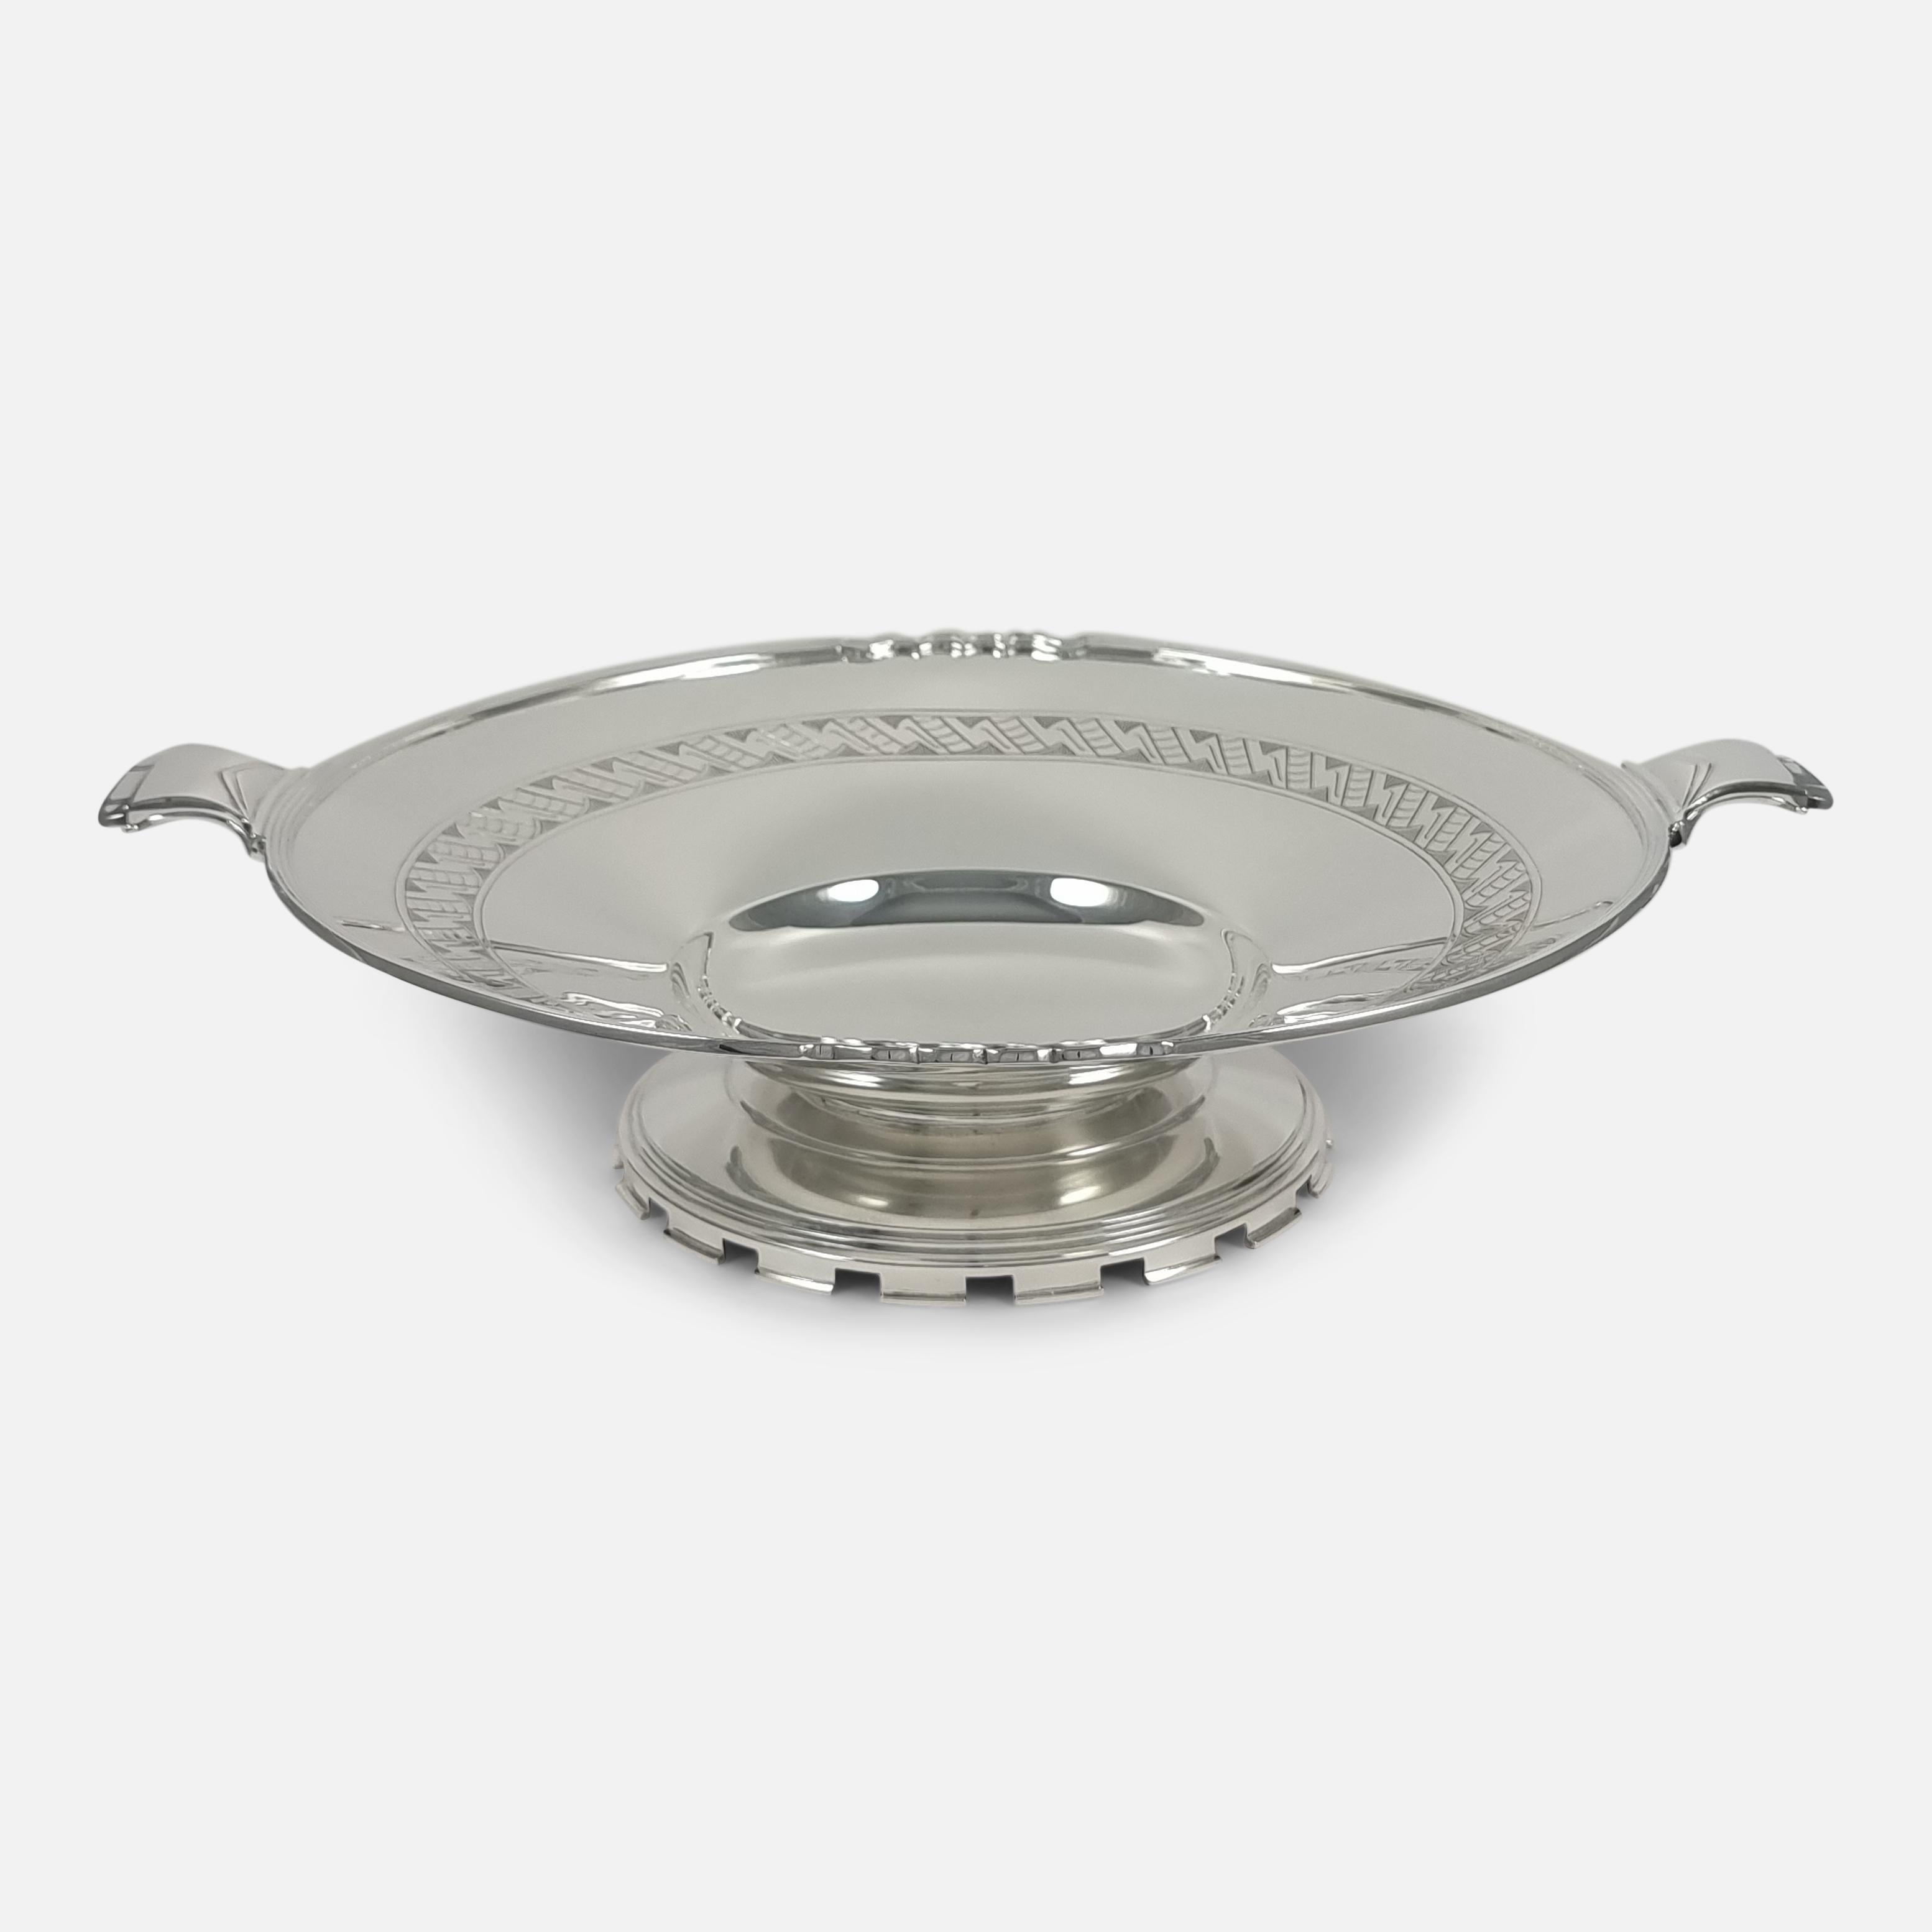 Art Deco Sterling Silver Dish, Mappin & Webb, 1936 For Sale 4